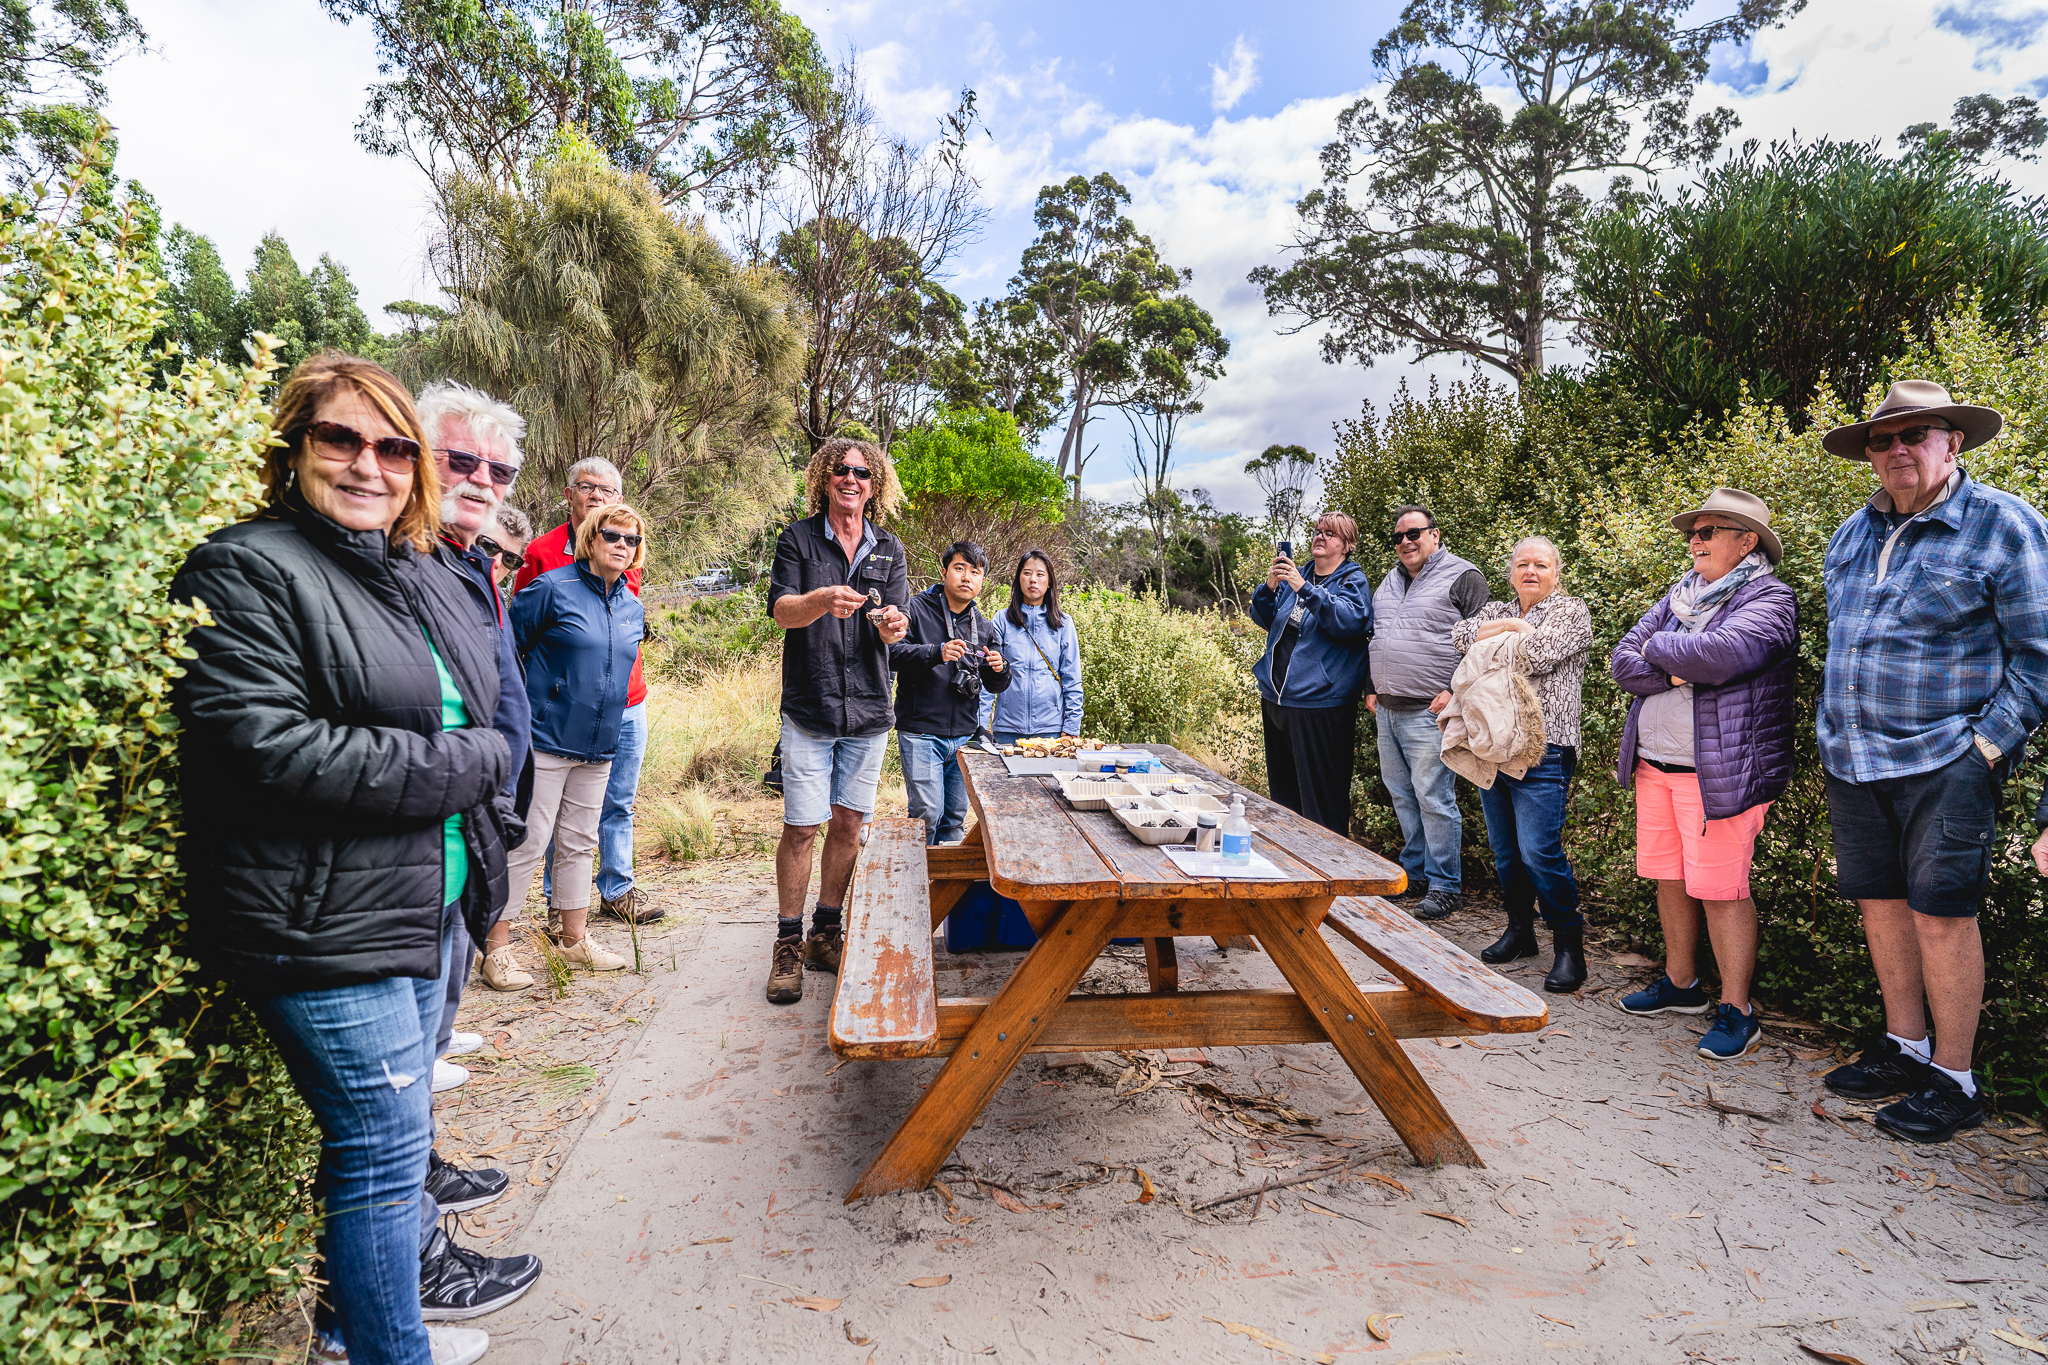 Bruny Island Safaris - Foods, Sightseeing and Lighthouse Tour